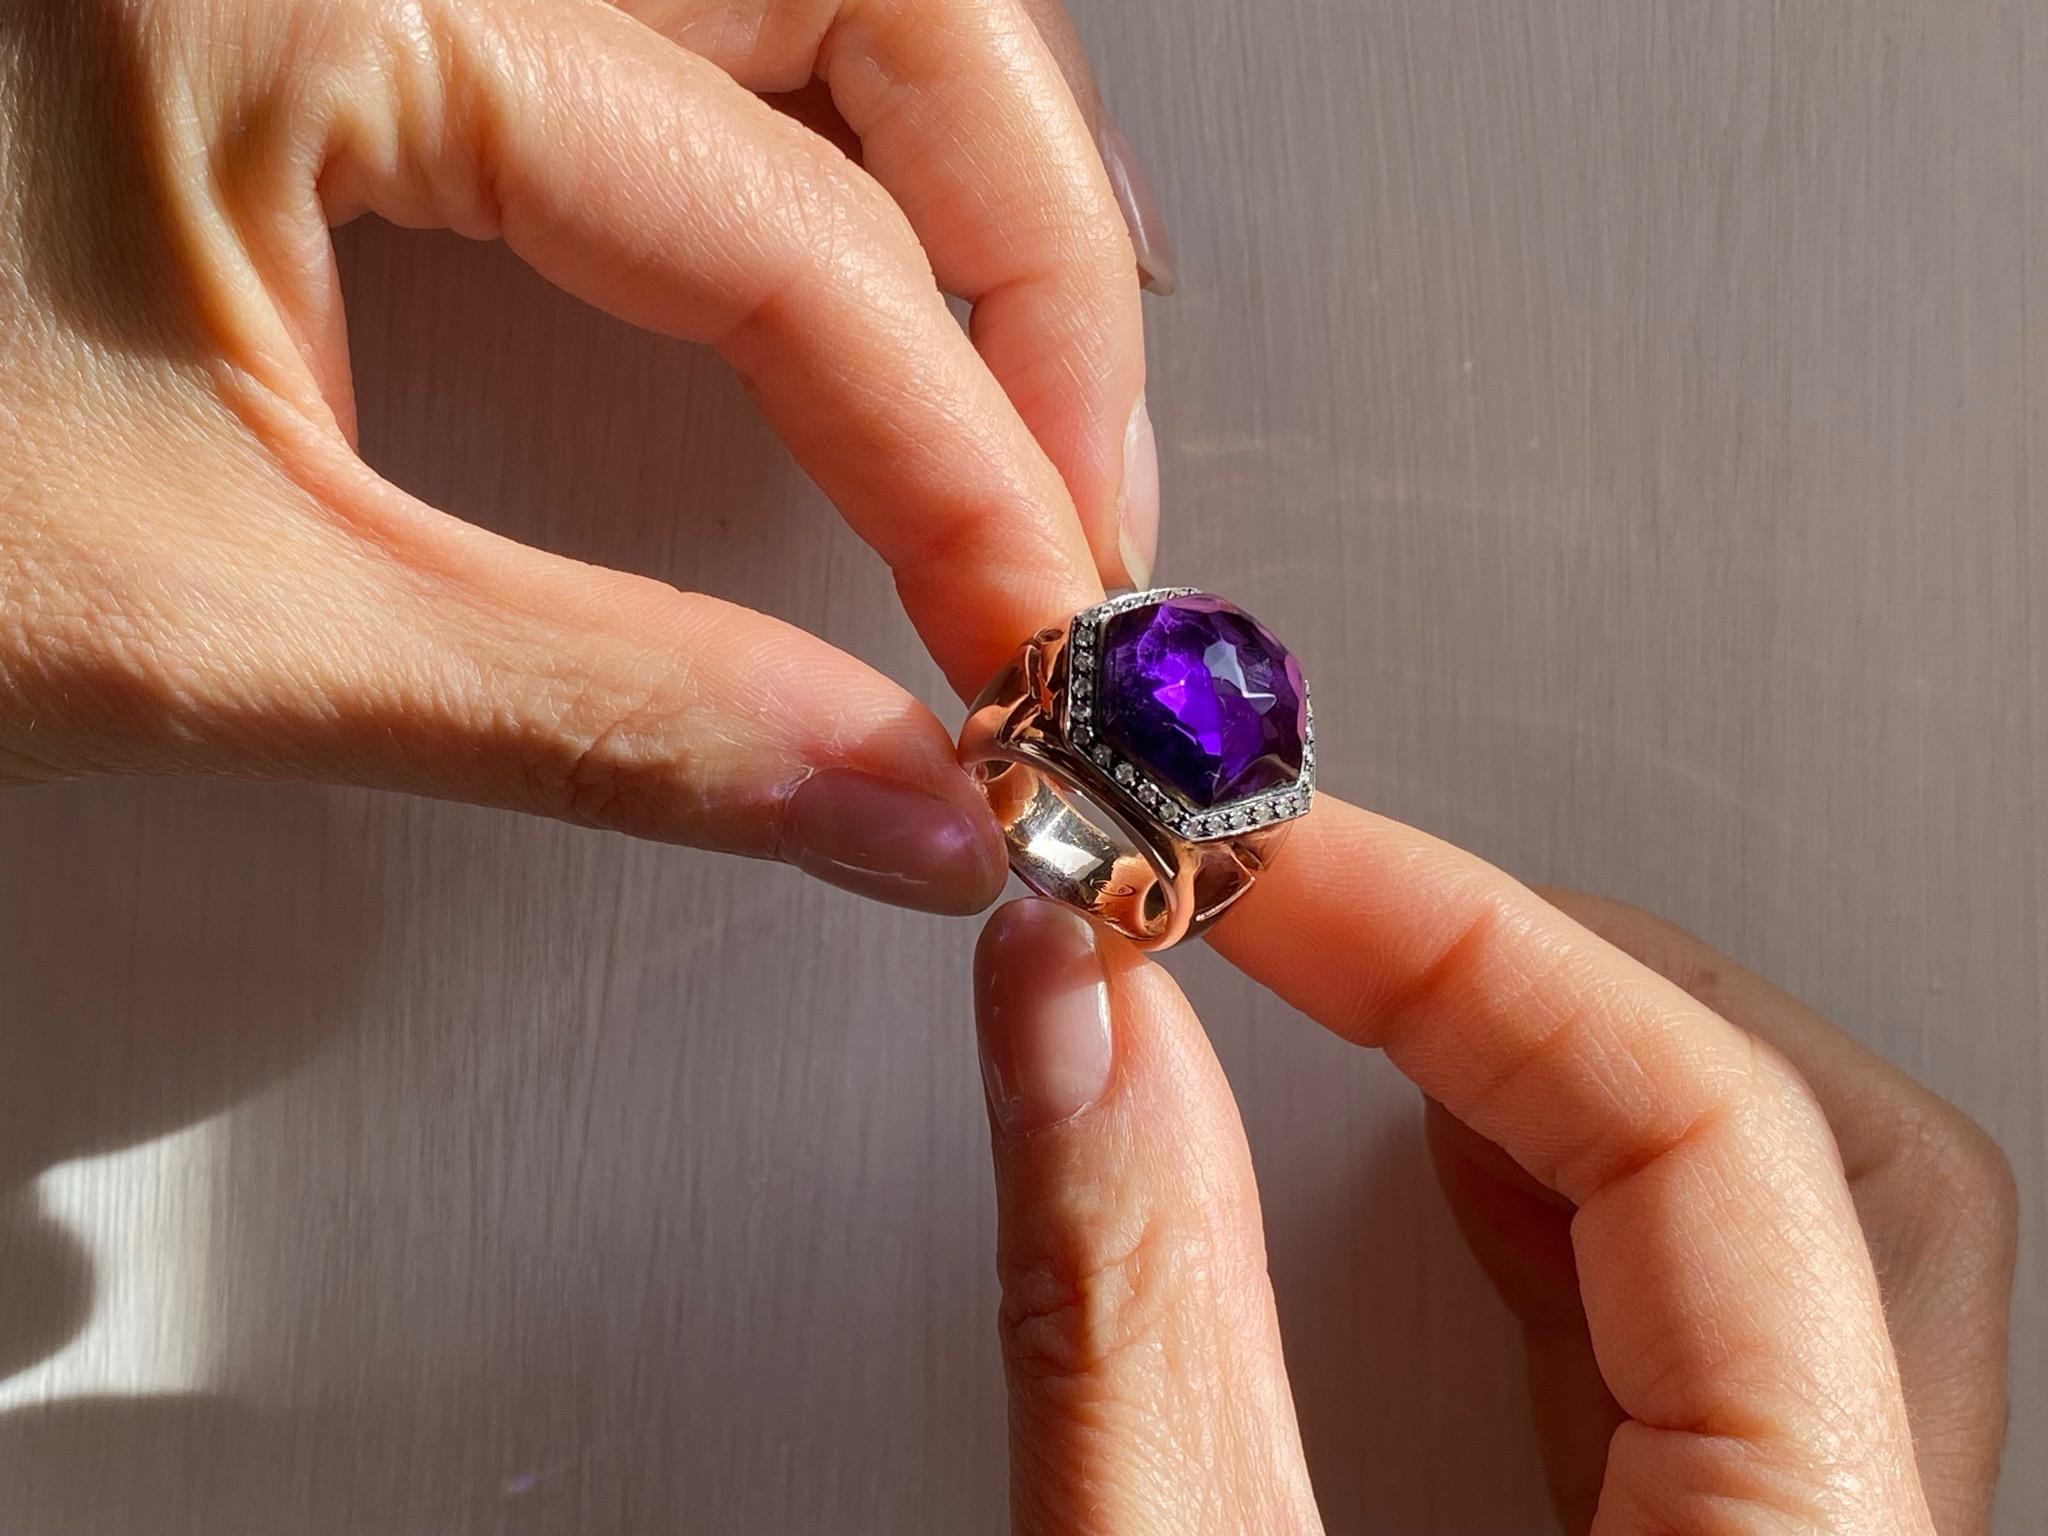 Here there is a beautiful design ring handcrafted in 18 karats rose gold and embellished with 0.40 karats brilliant cut white diamonds and a deep purple amethyst stone. 
Available size 6.25 (Italian size 13), other sizes available in two weeks by